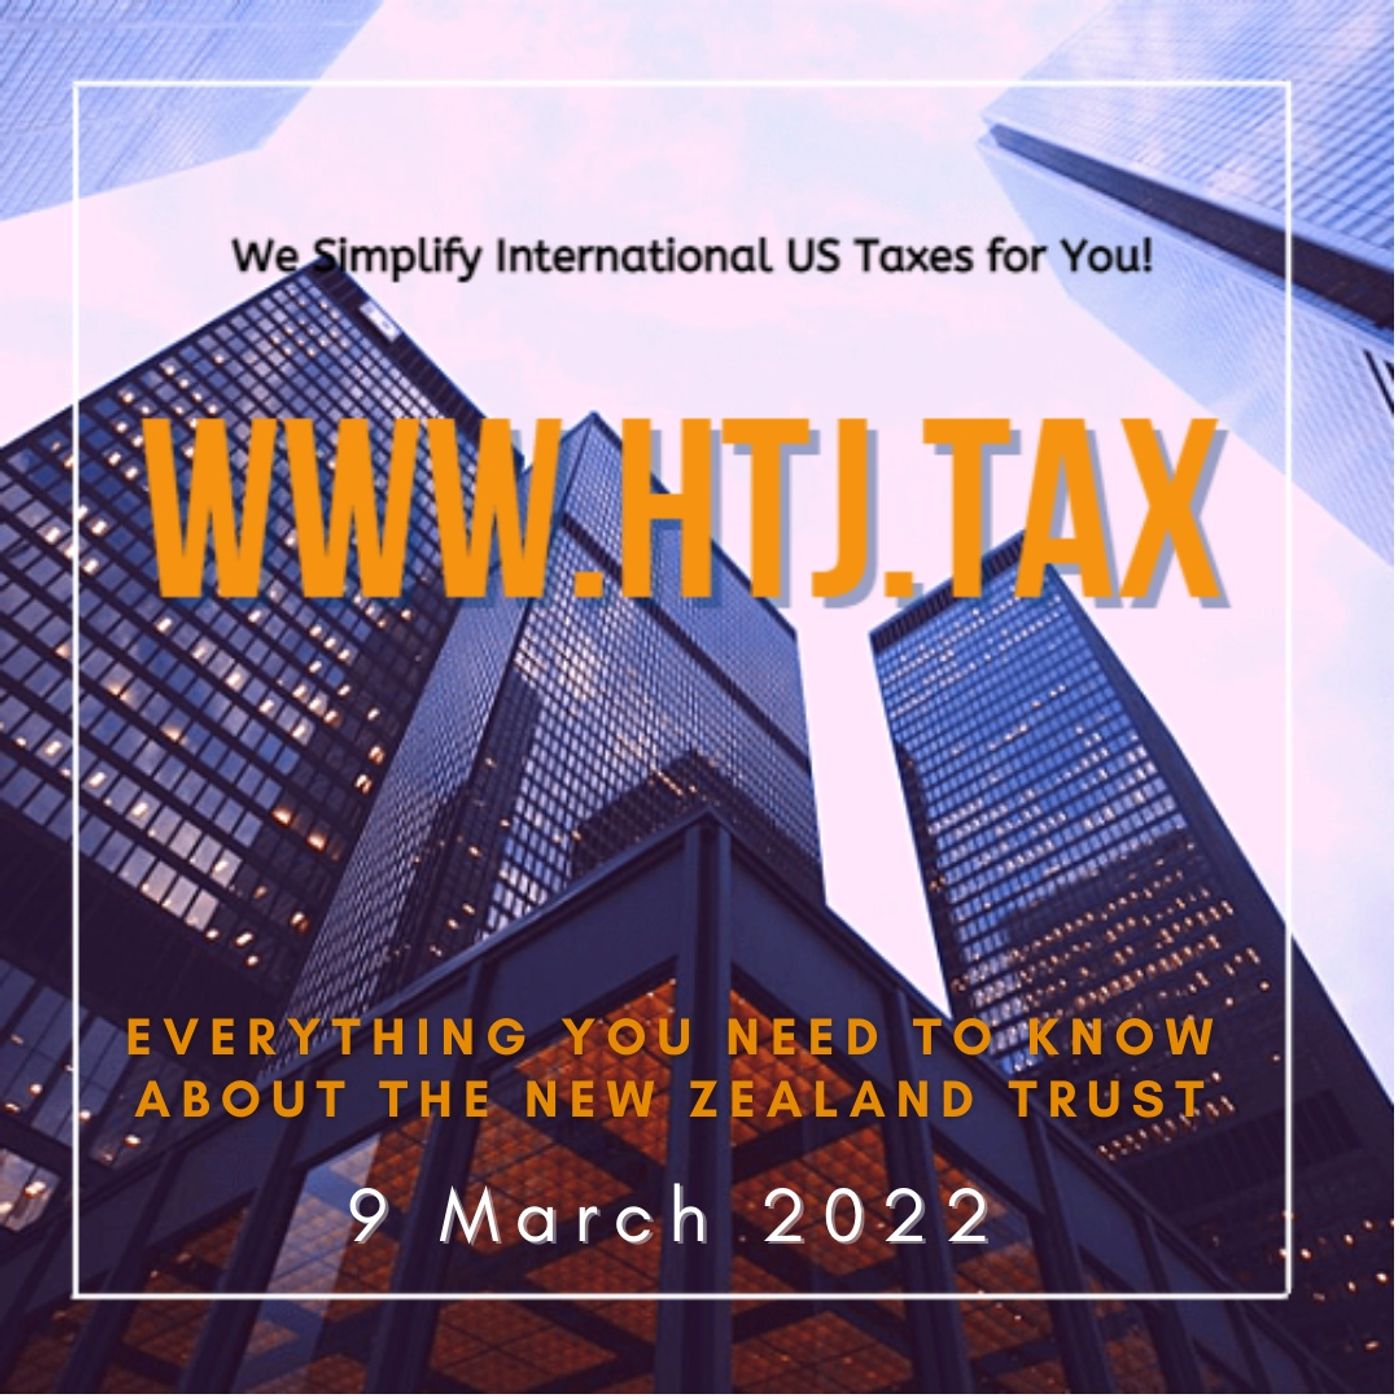 [ Offshore Tax ] Everything You Need To Know About The New Zealand Trust 9th March 2022